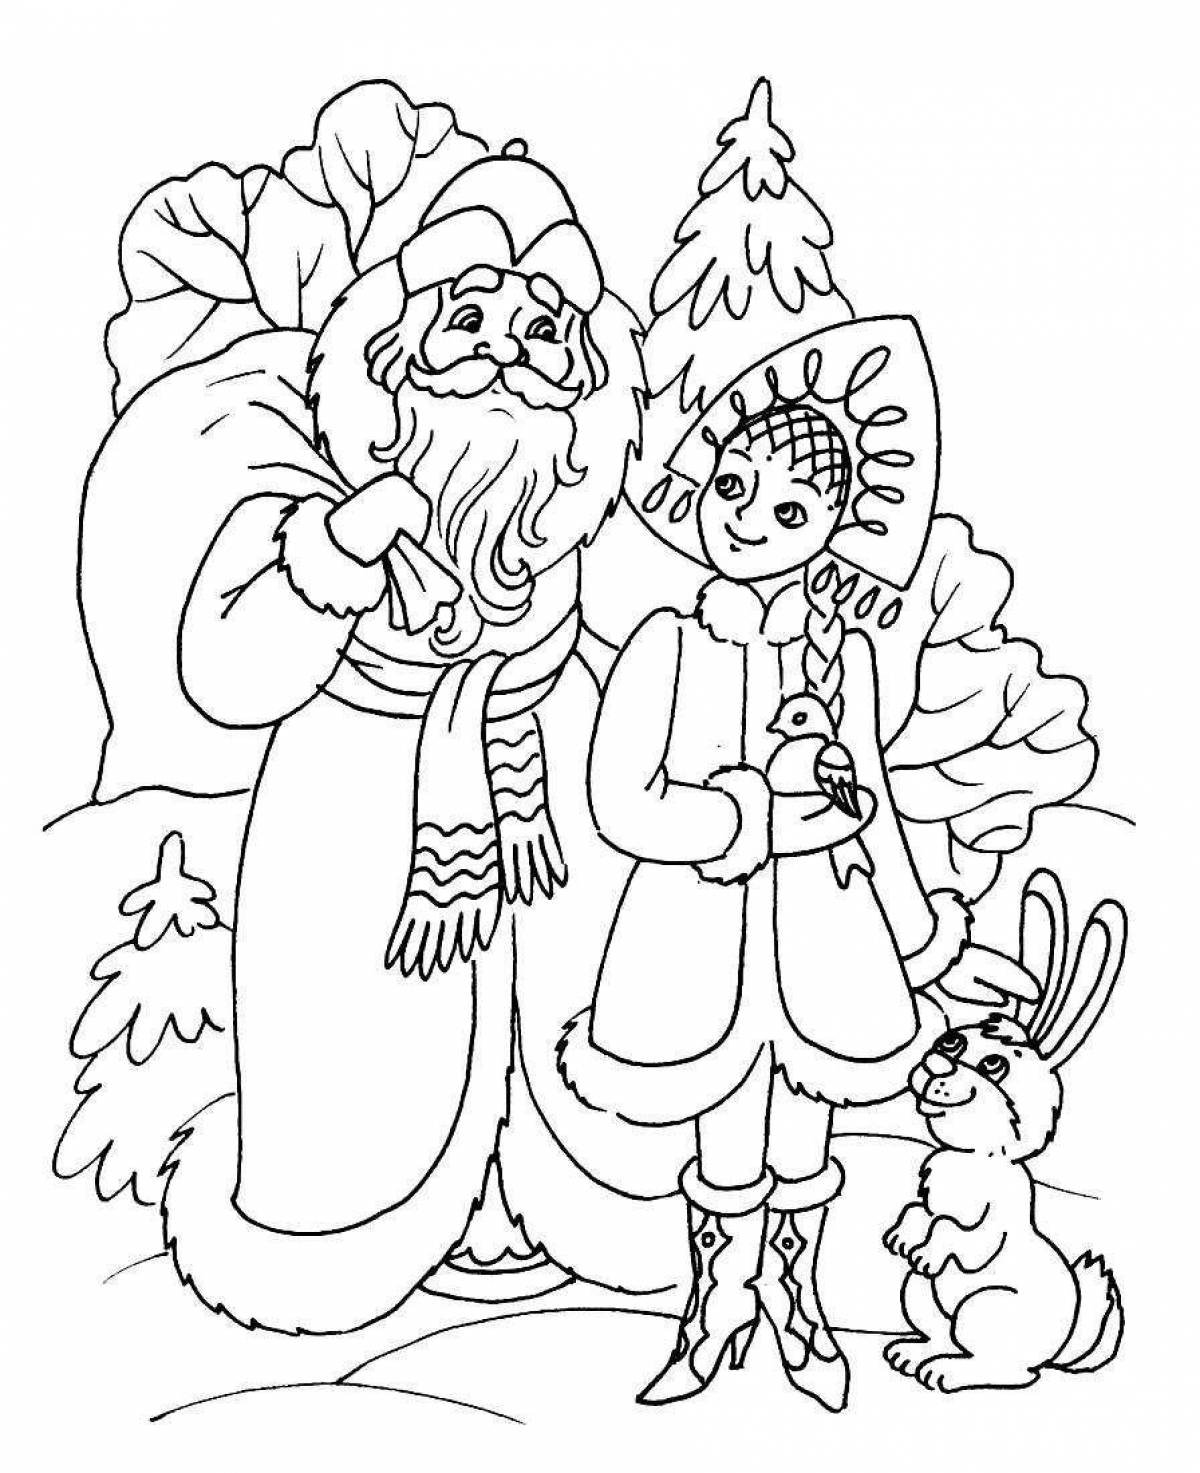 Delightful Snow Maiden and Lel coloring